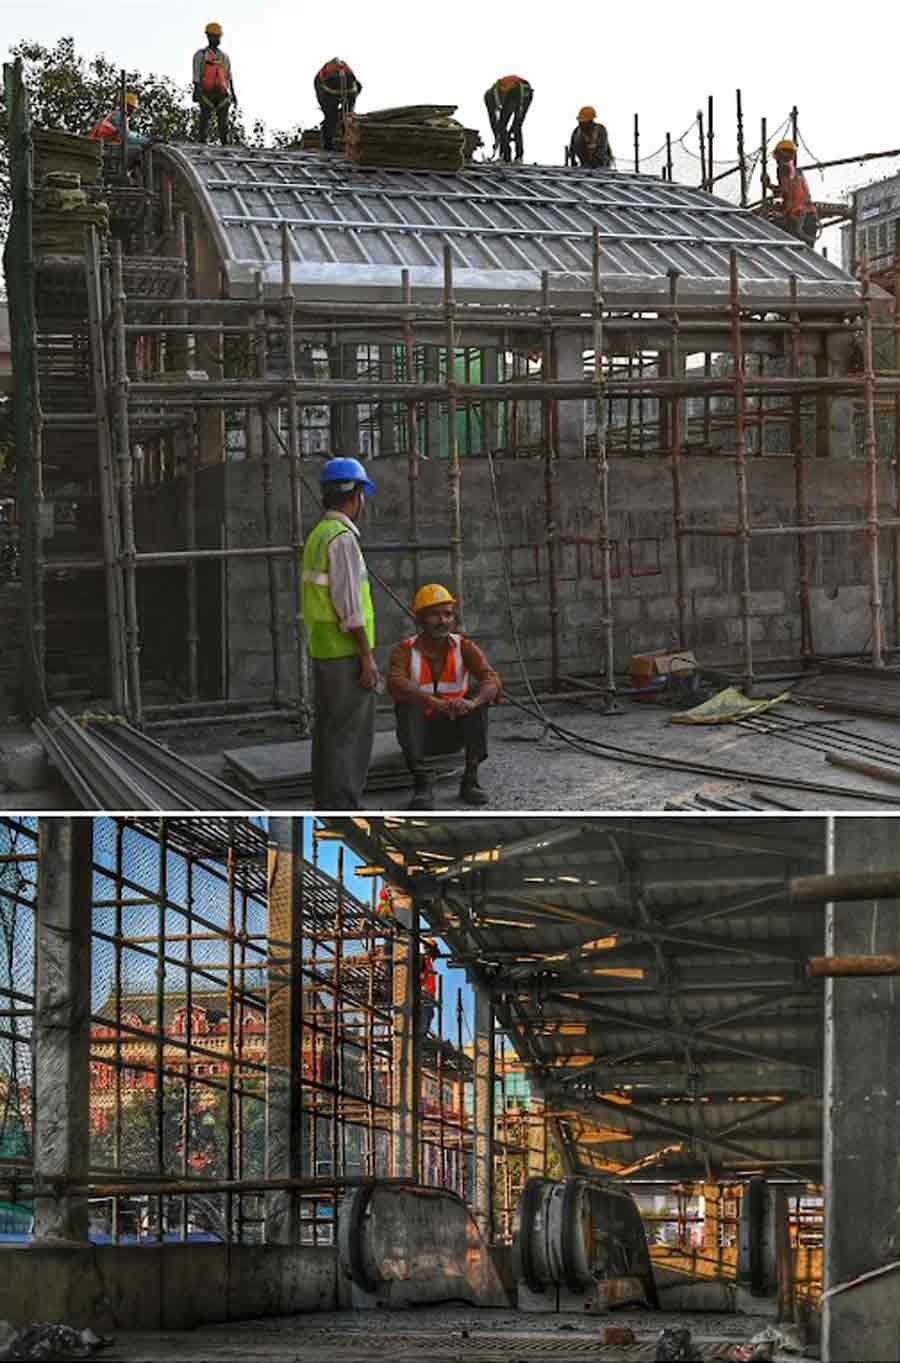 Metro Railway work at BBD Bag has gained pace. On February 4, Calcutta High Court had directed the Railway Vikas Nigam Limited to commence with the Joka-BBD Bag Metro construction in the Maidan area. The RVNL, in its plea, had stated earlier that the construction work in the route was delayed as it had to wait for Army clearance